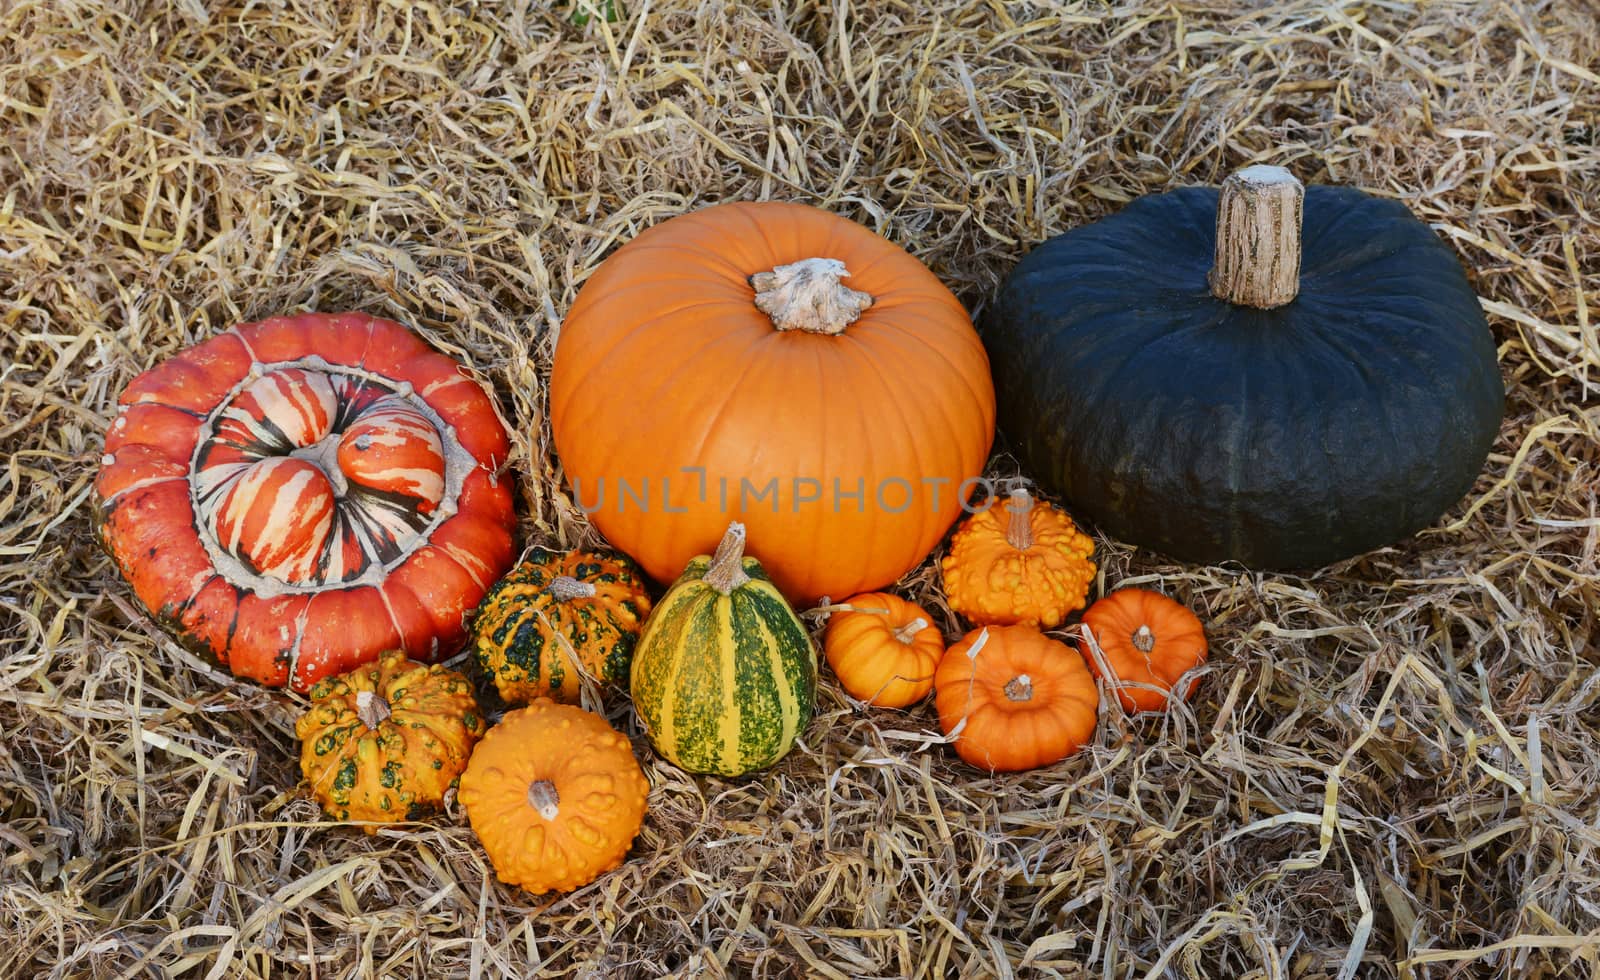 Group of large and small pumpkins and gourds - orange and green - on straw